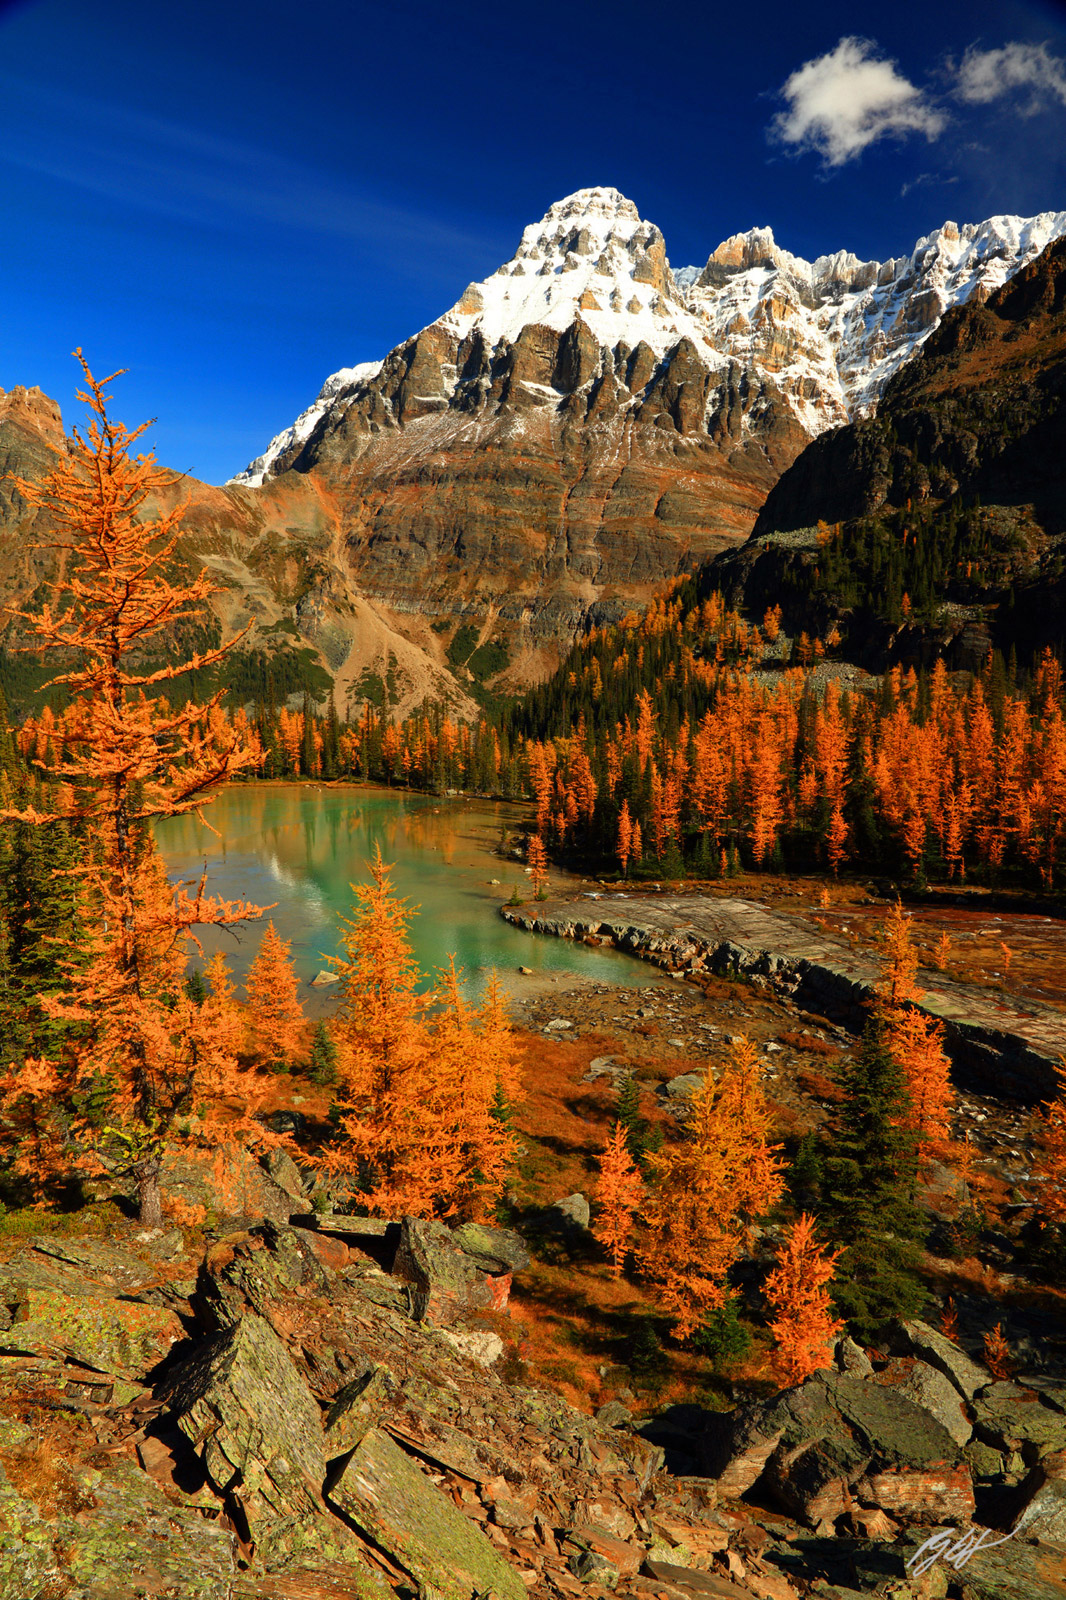 Golden Larch and Mt Huber from Opabin Plateau in the Lake O'Hara Region of Yoho National Park in Canada